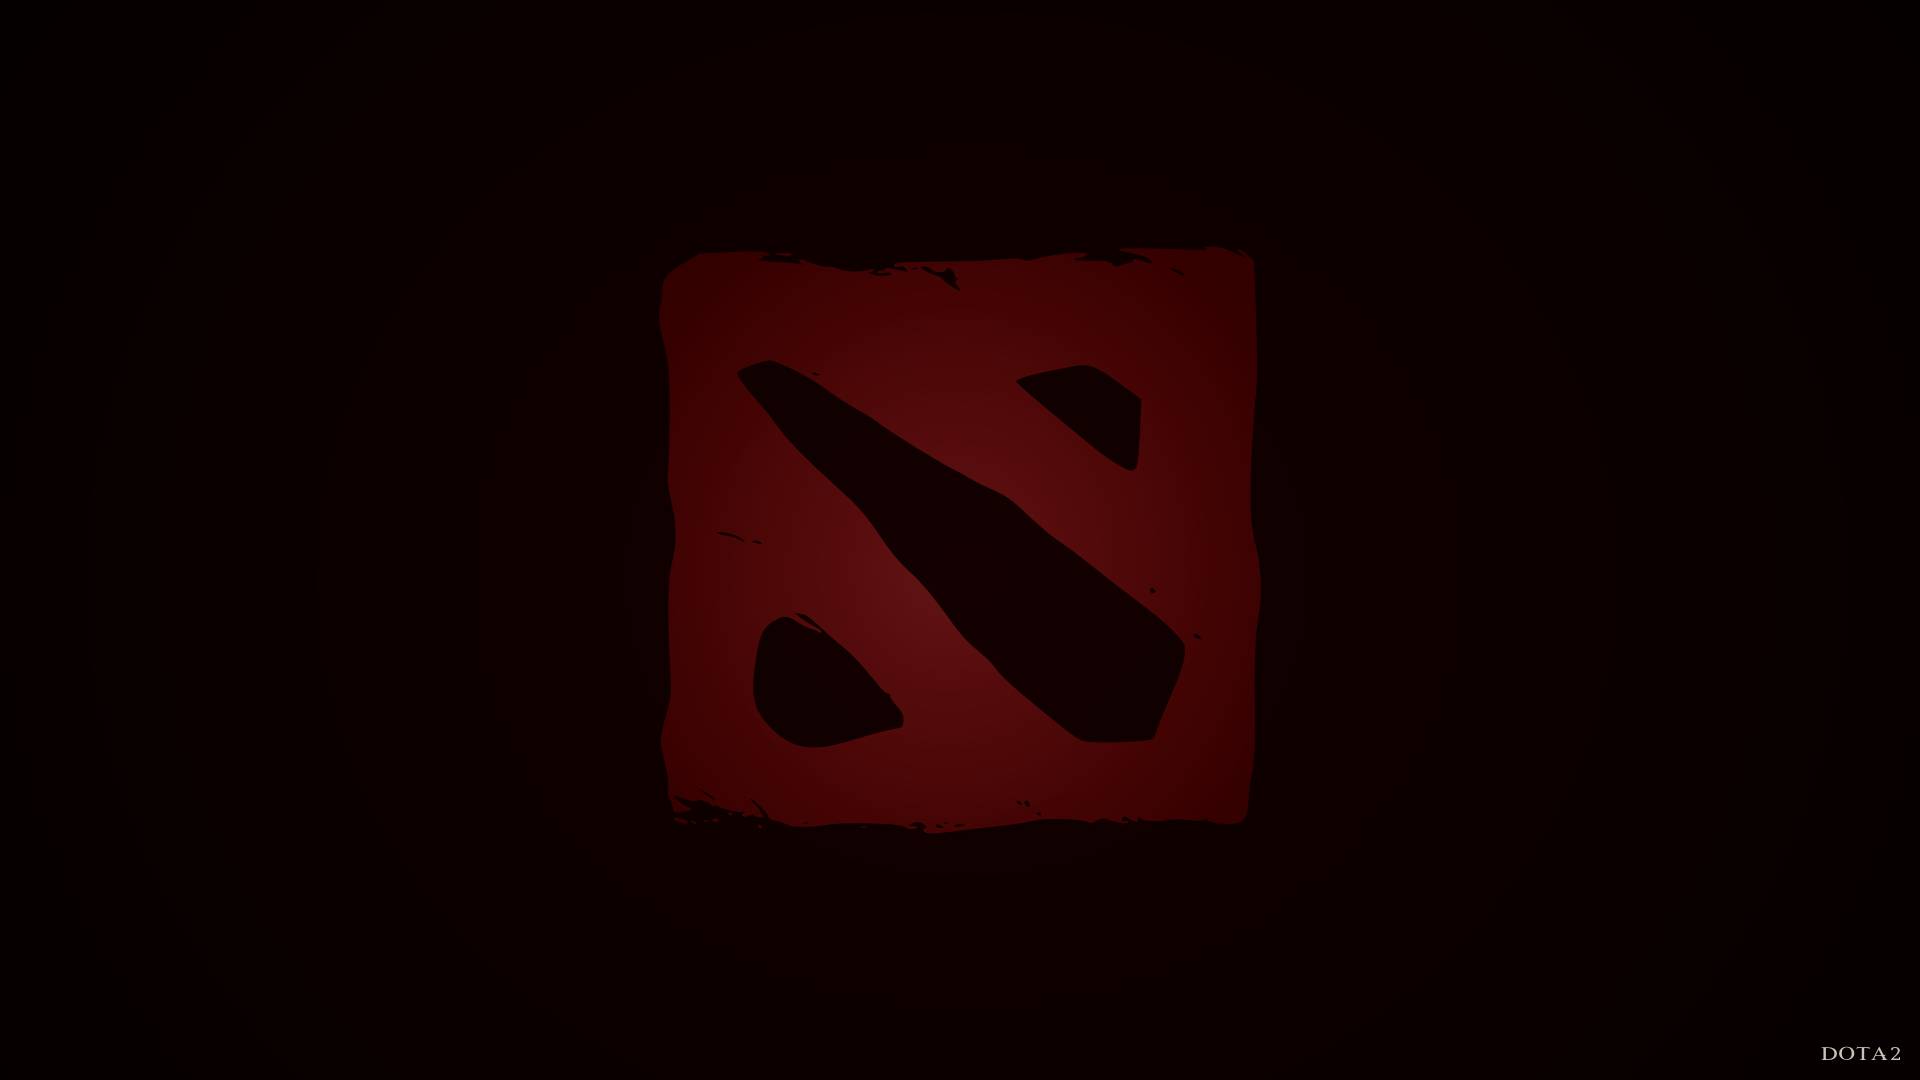 DotA 2 introduces two new heroes